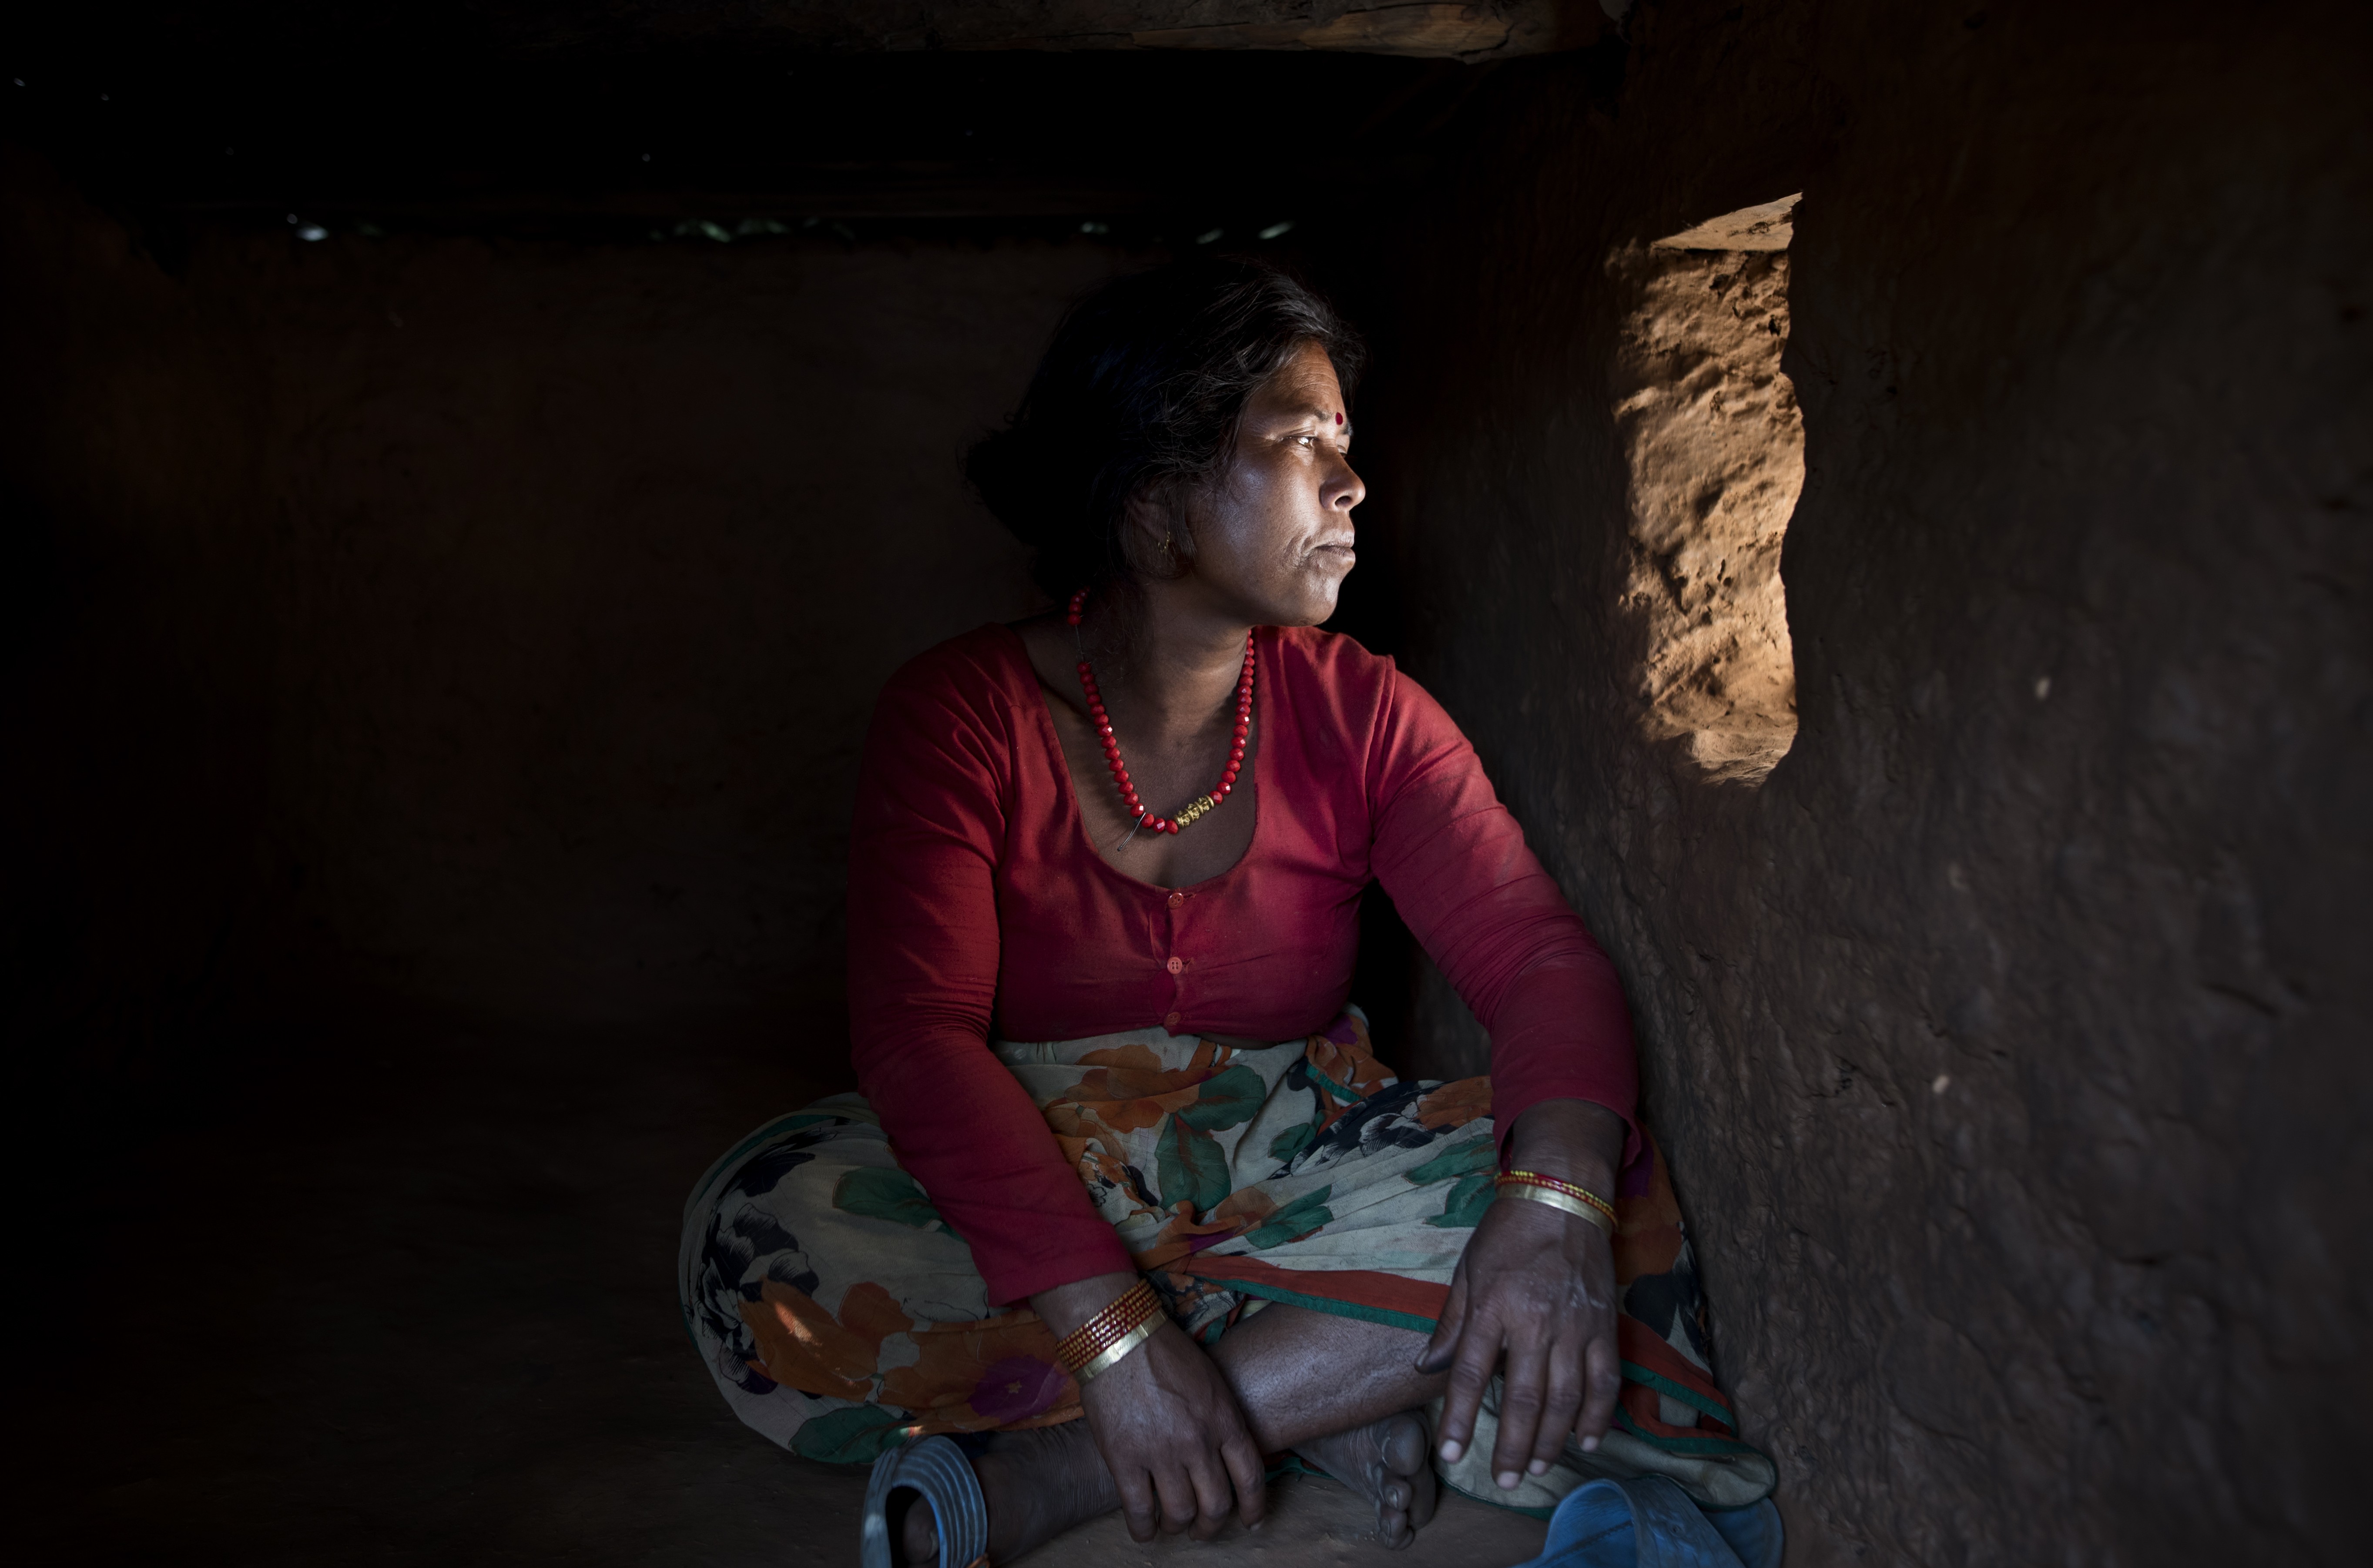 Last year, Nepal announced a ban on chhaupadi – the age-old tradition of exiling women to huts during menstruation – but authorities face an immense challenge in implementing the new law when it comes into effect in August